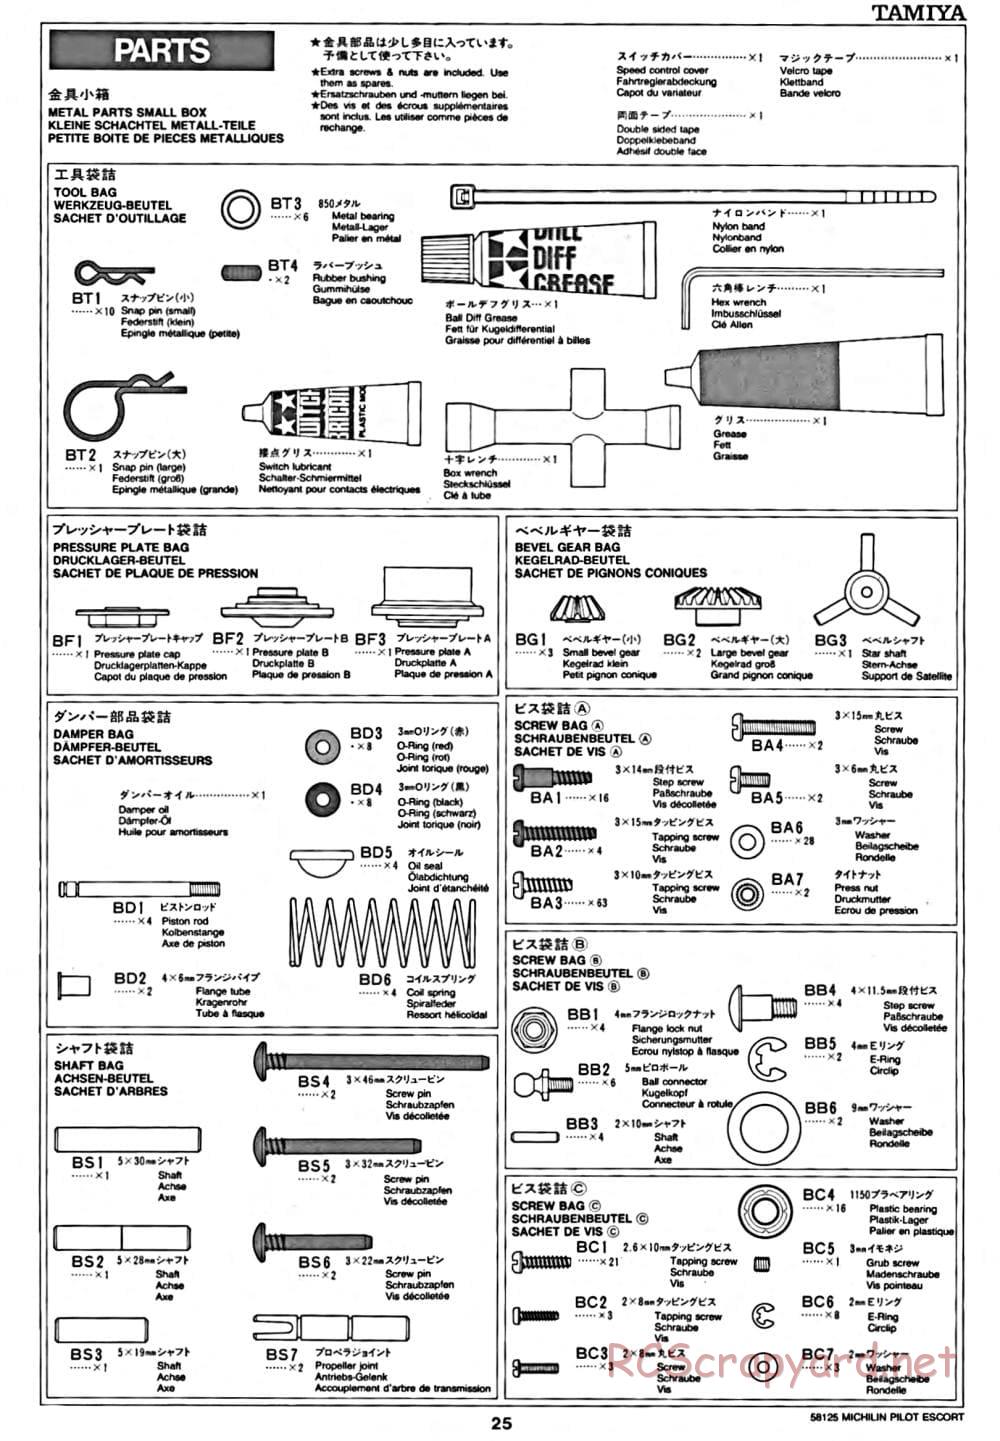 Tamiya - Michelin Pilot Ford Escort RS Cosworth - TA-01 Chassis - Manual - Page 26